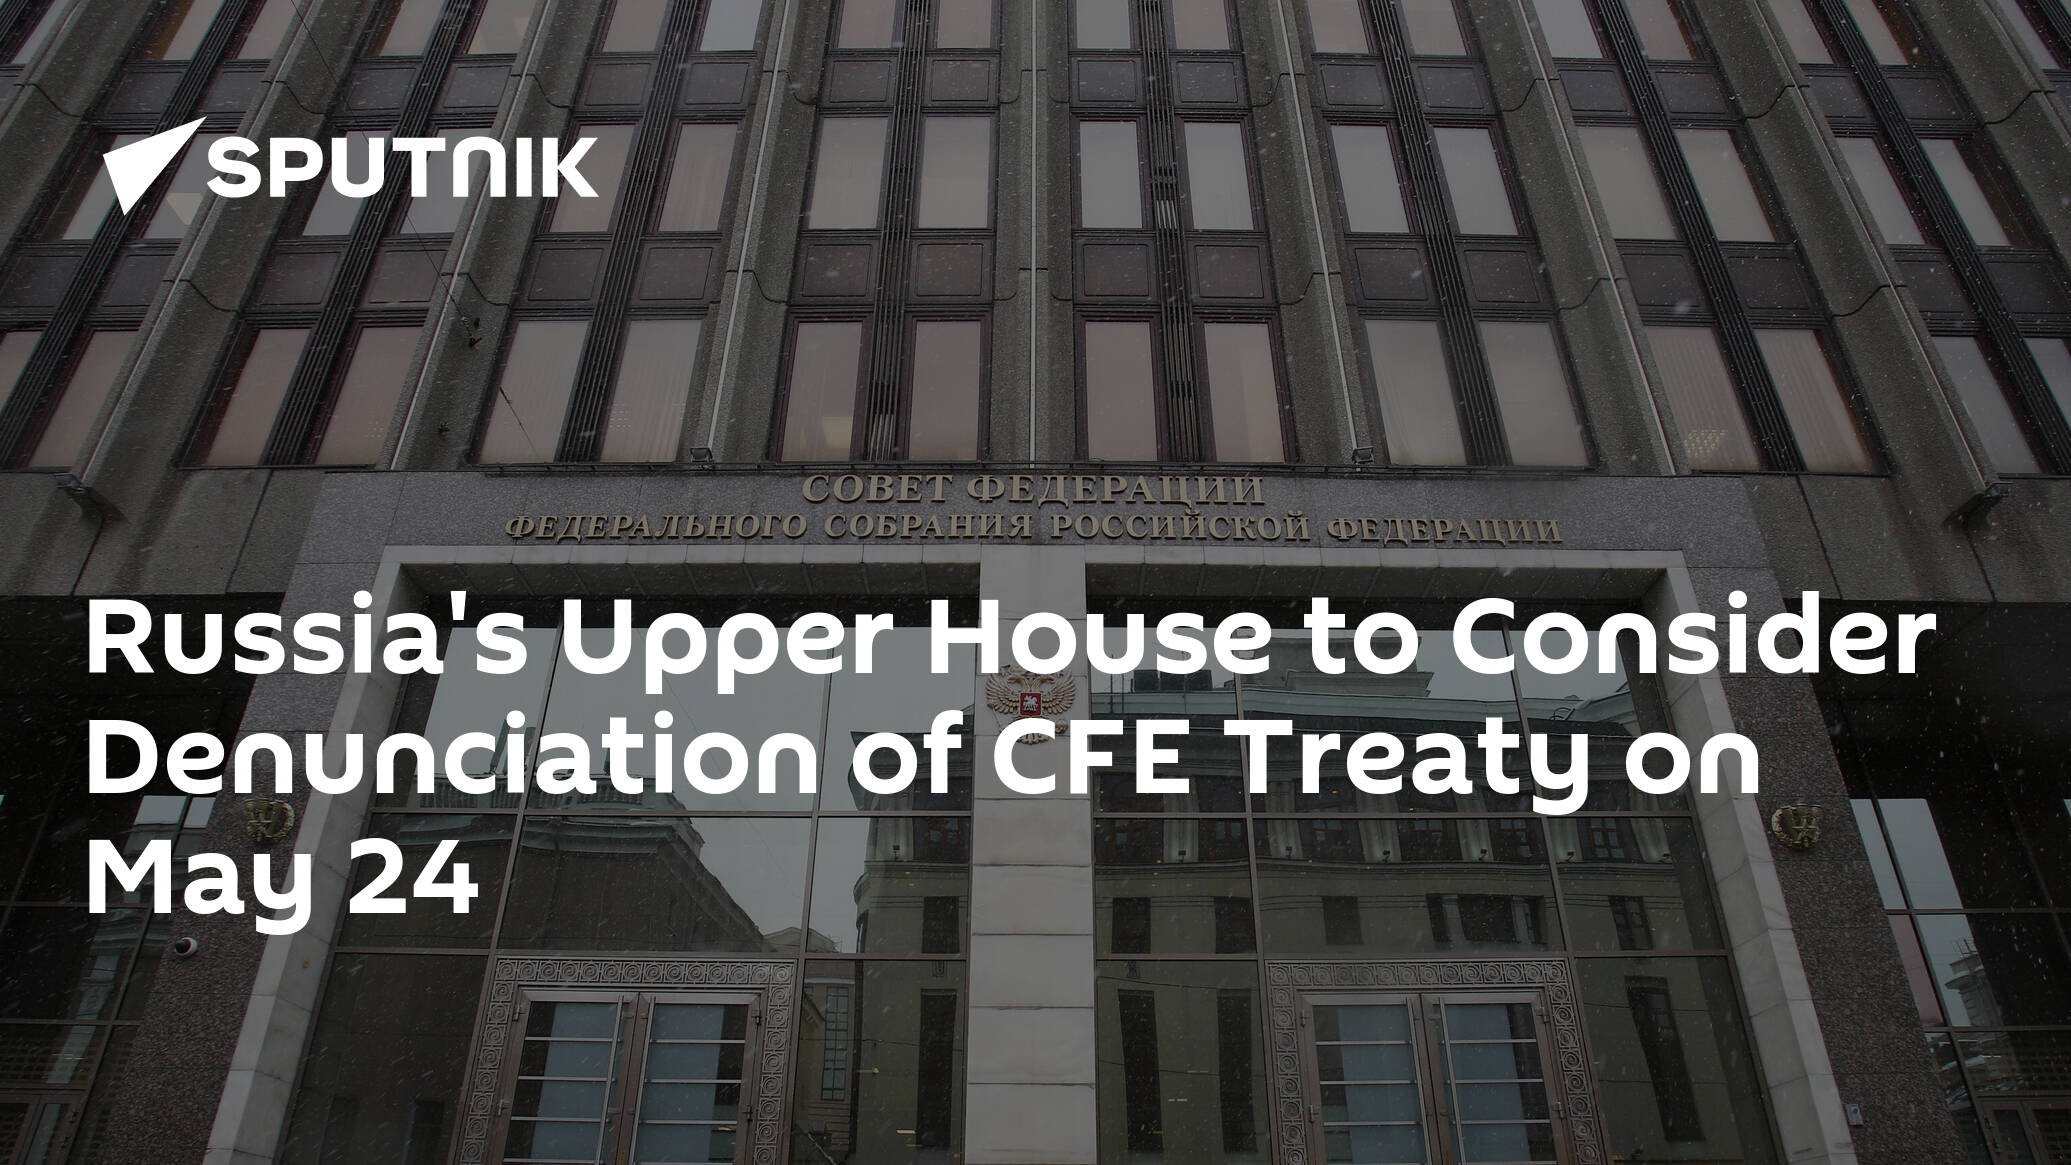 Russia's Upper House to Consider Denunciation of CFE Treaty on May 24